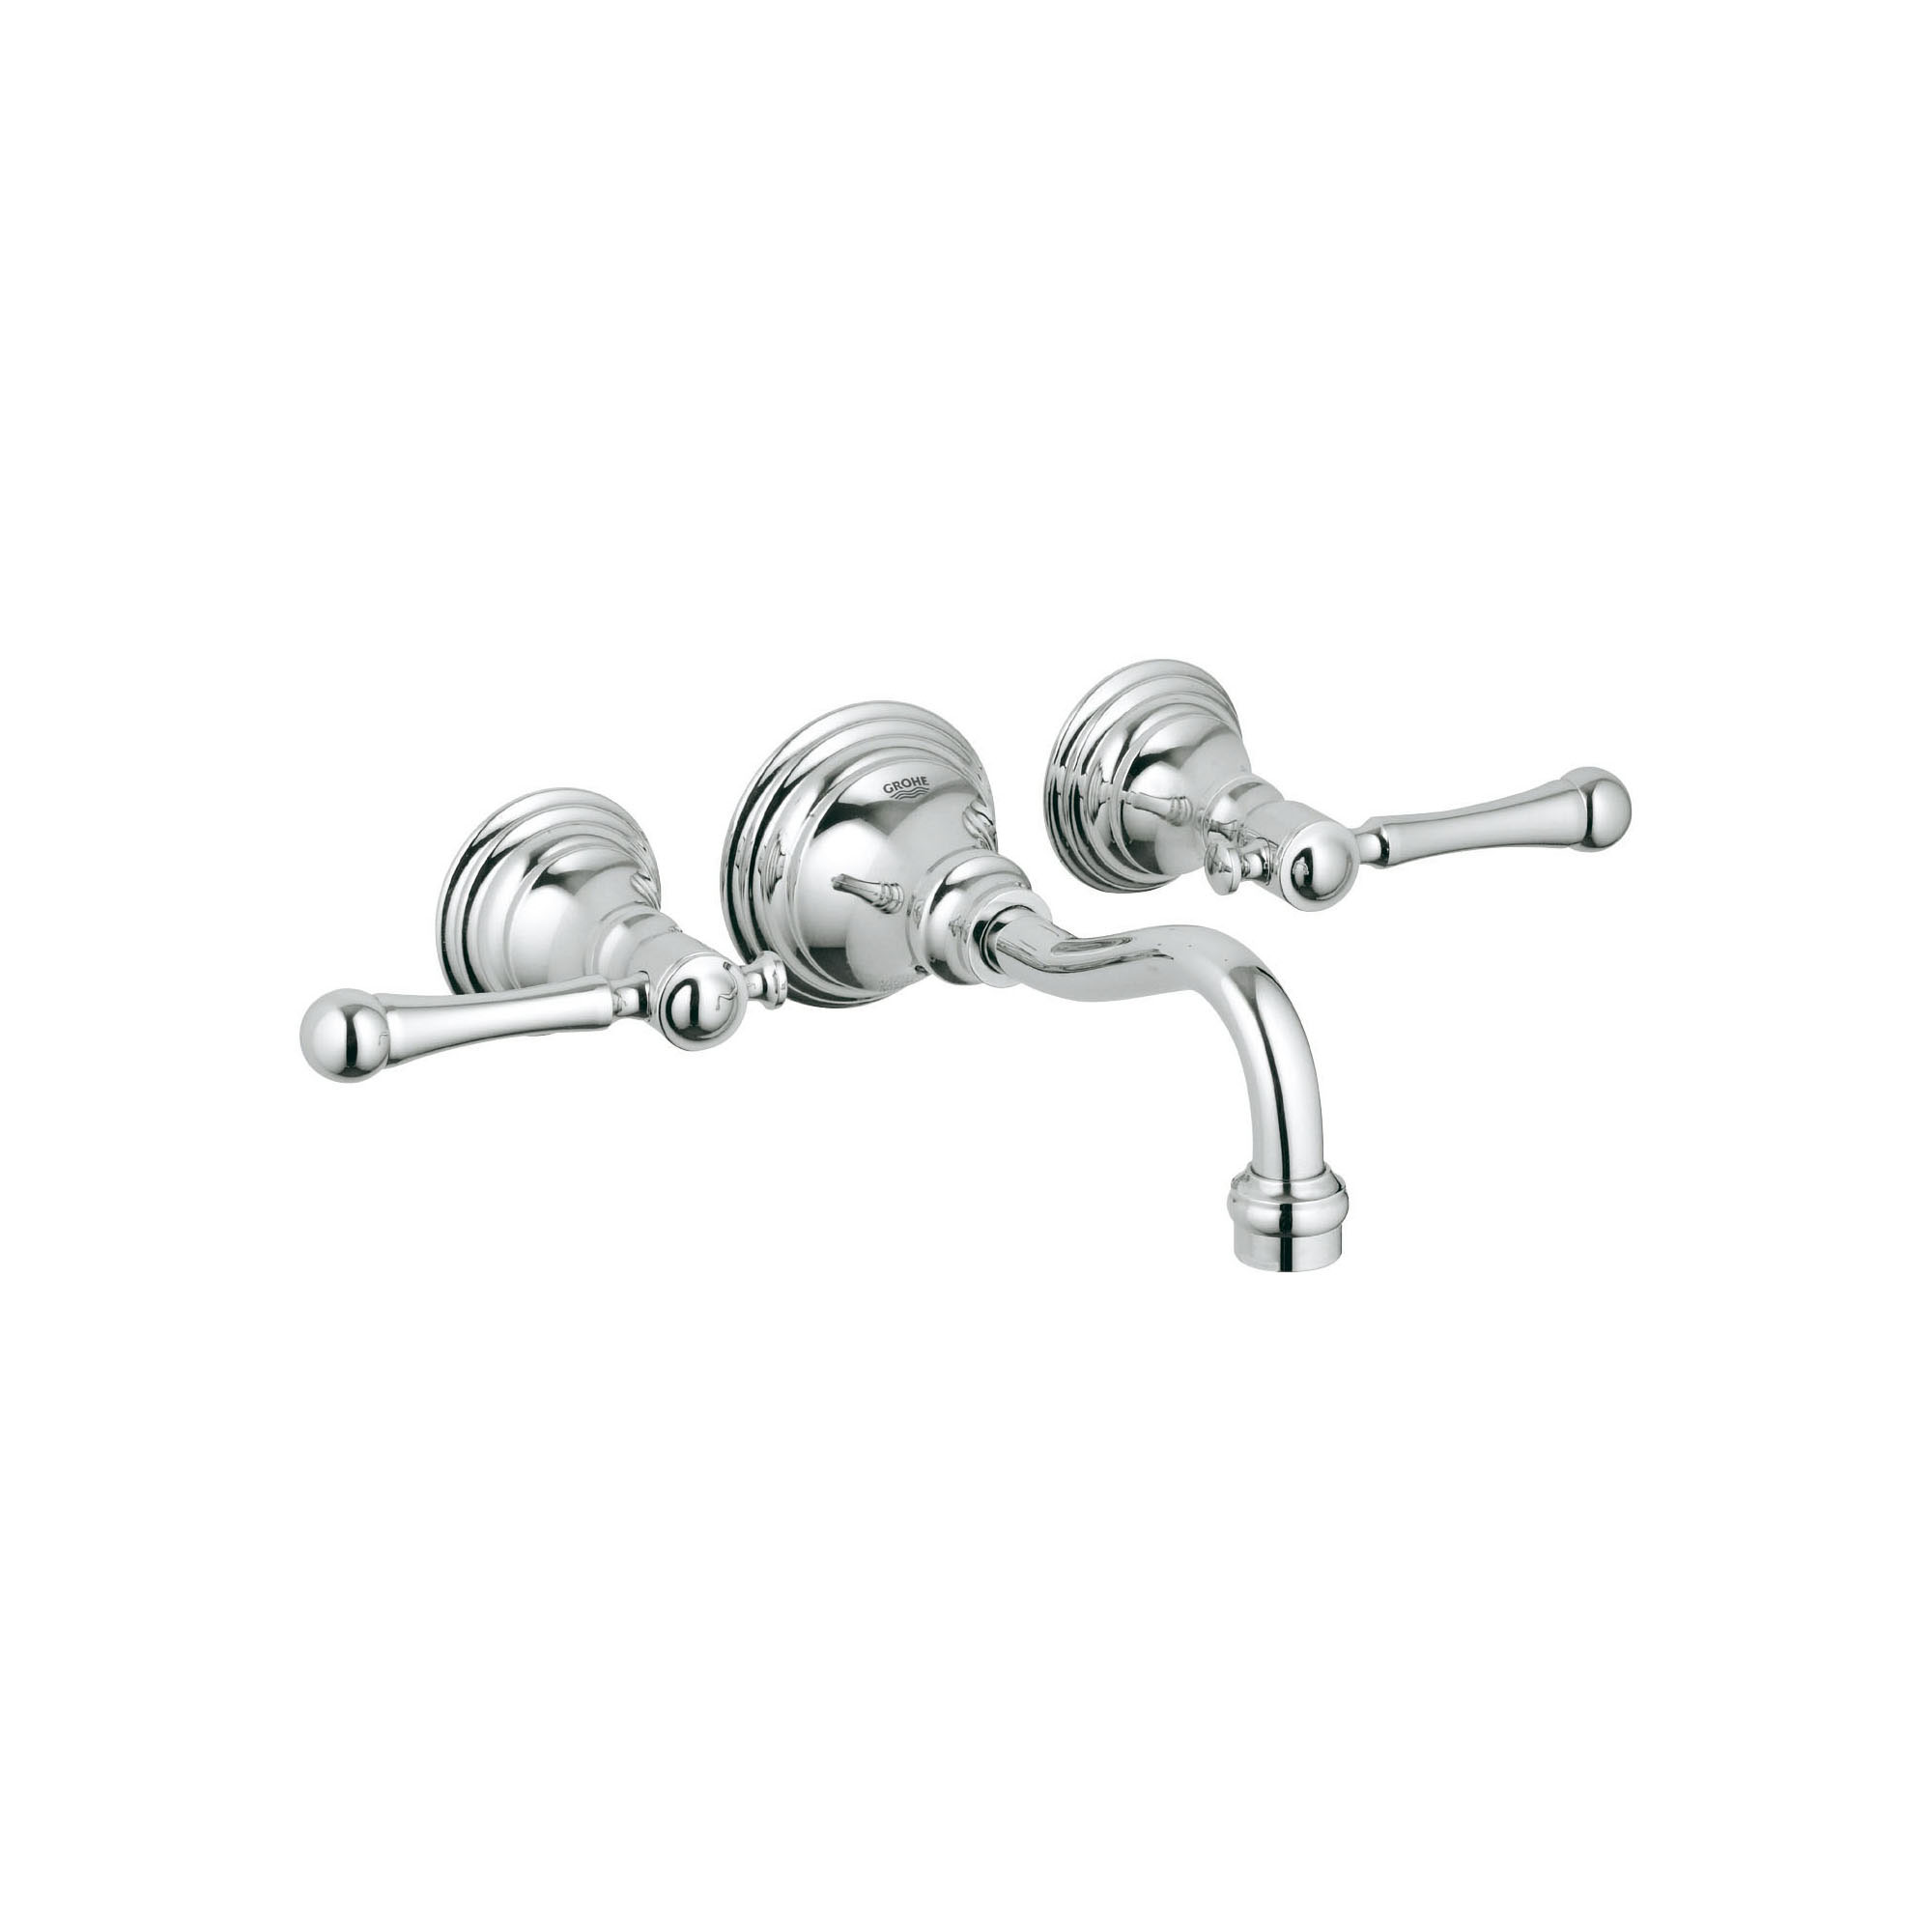 2-Handle Wall Mount Faucet 1.5 GPM